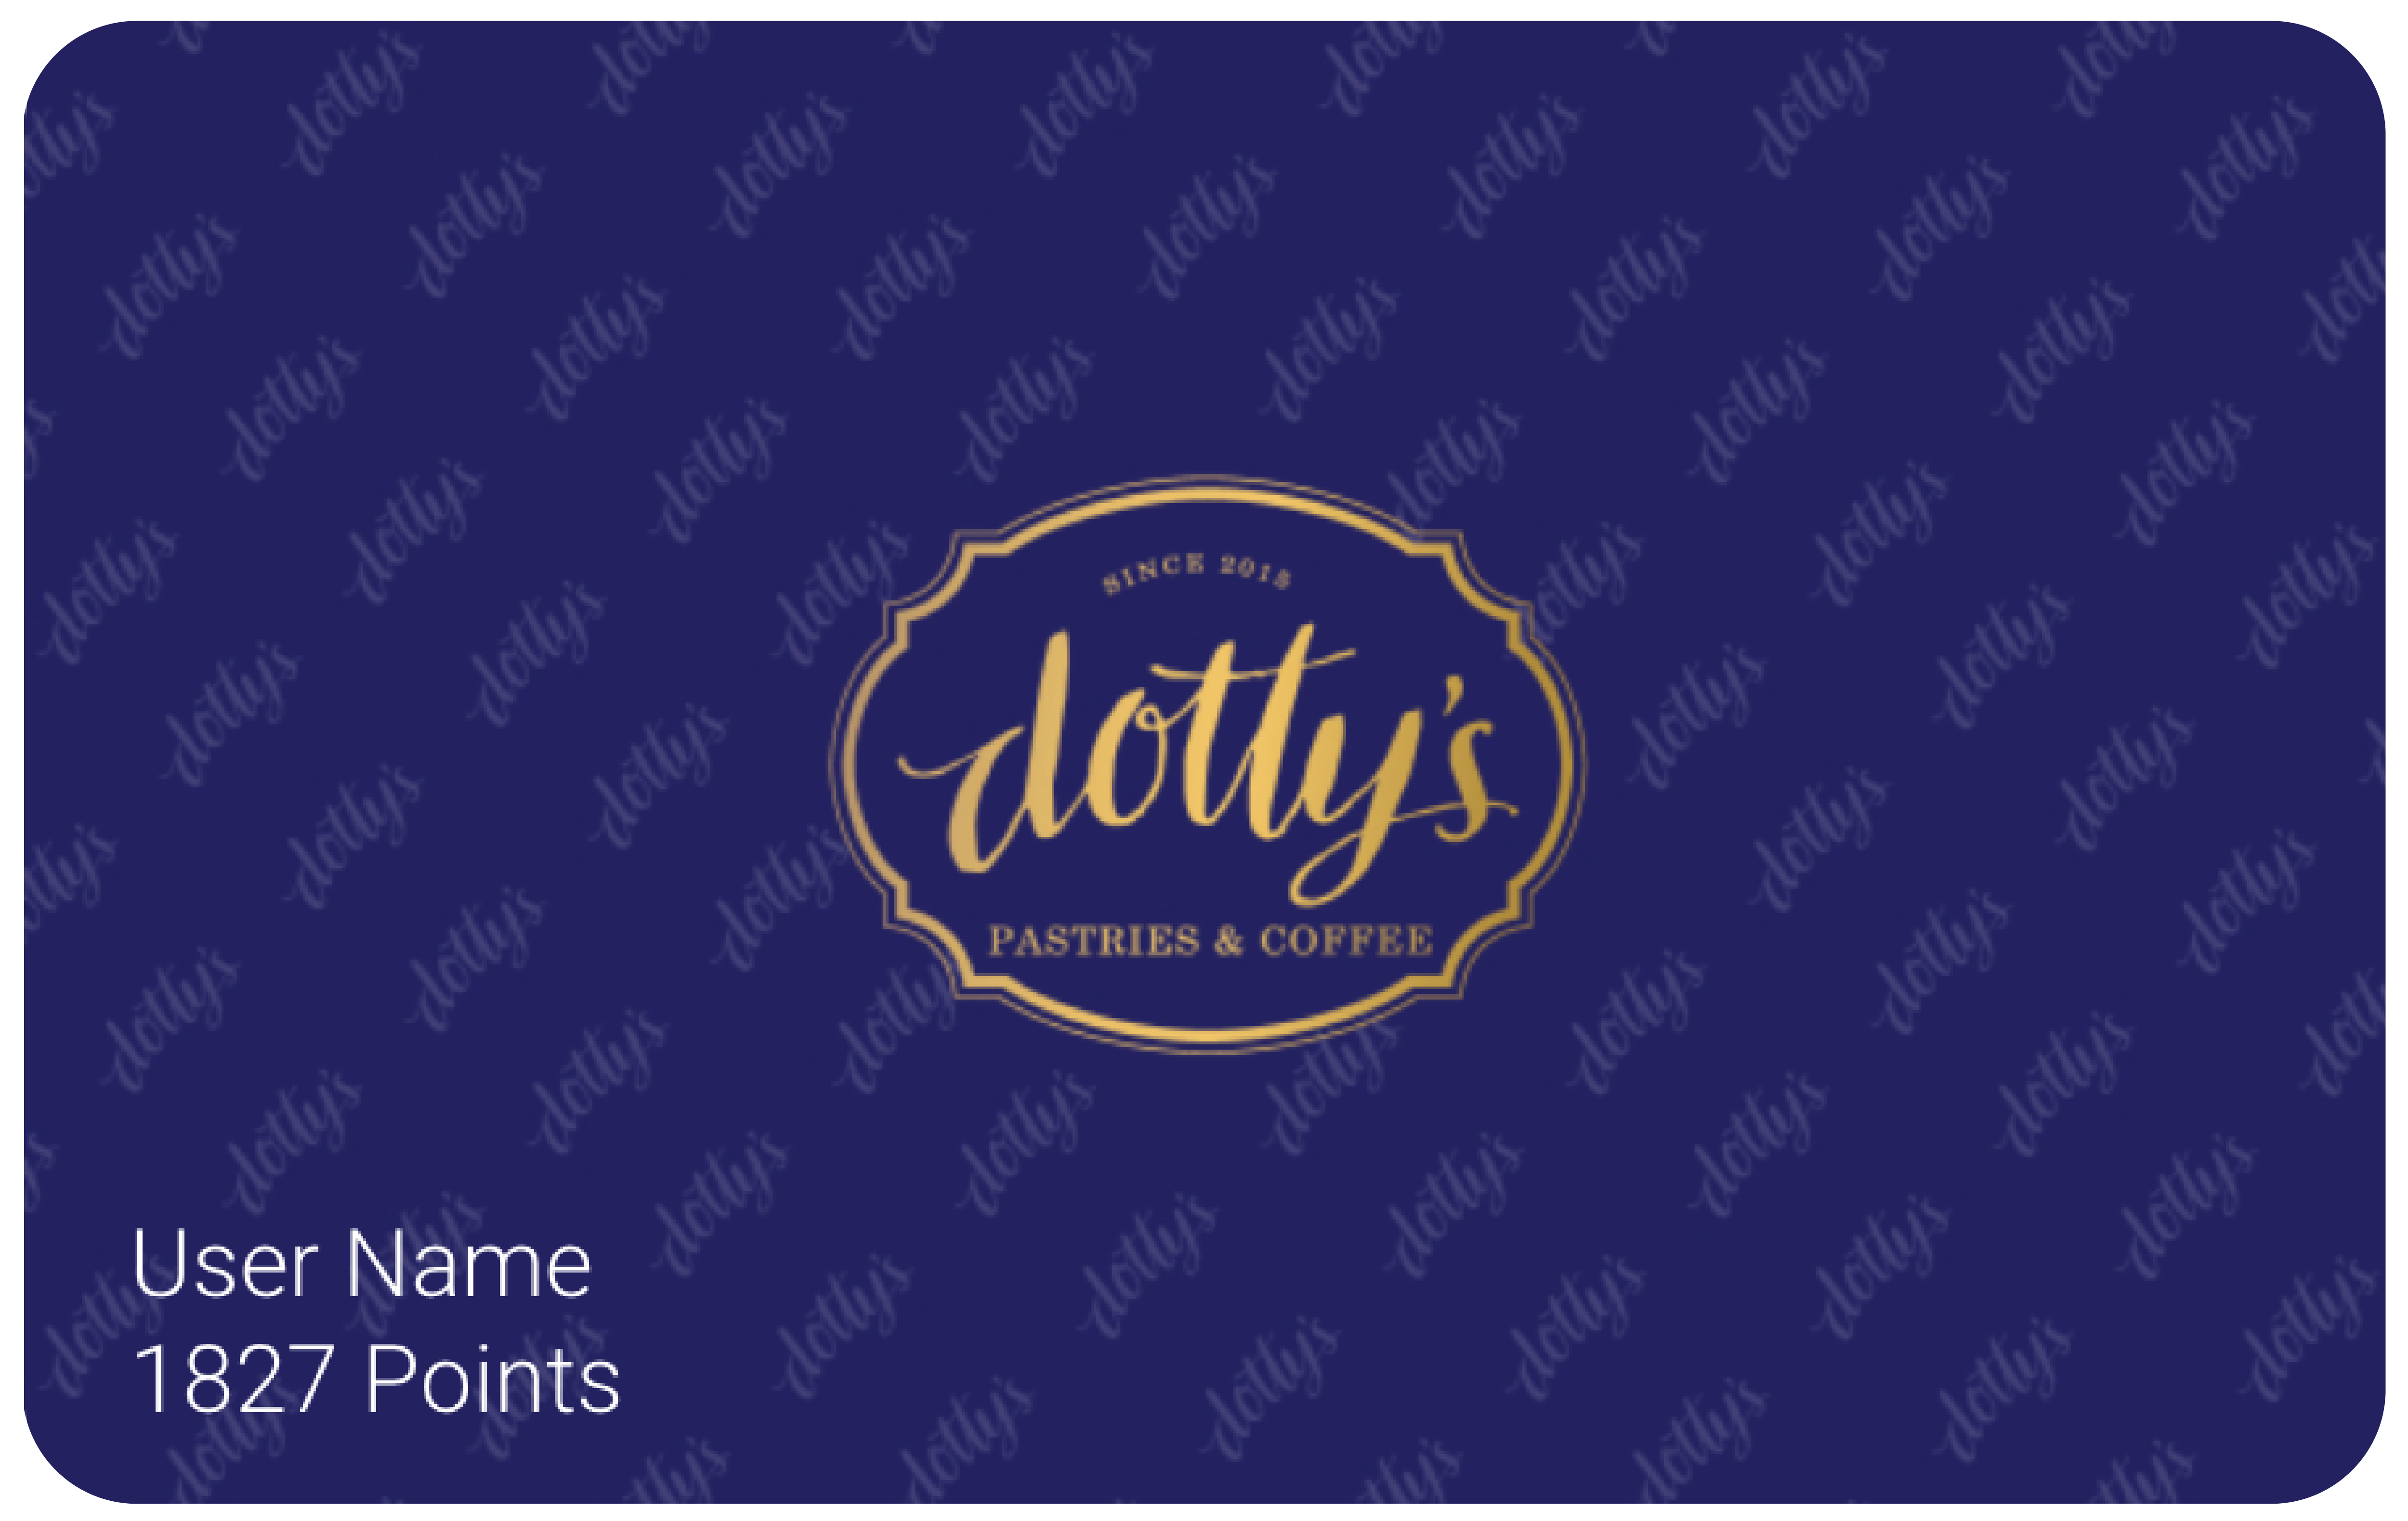 Dolly's Pastries & Coffee_Member Card